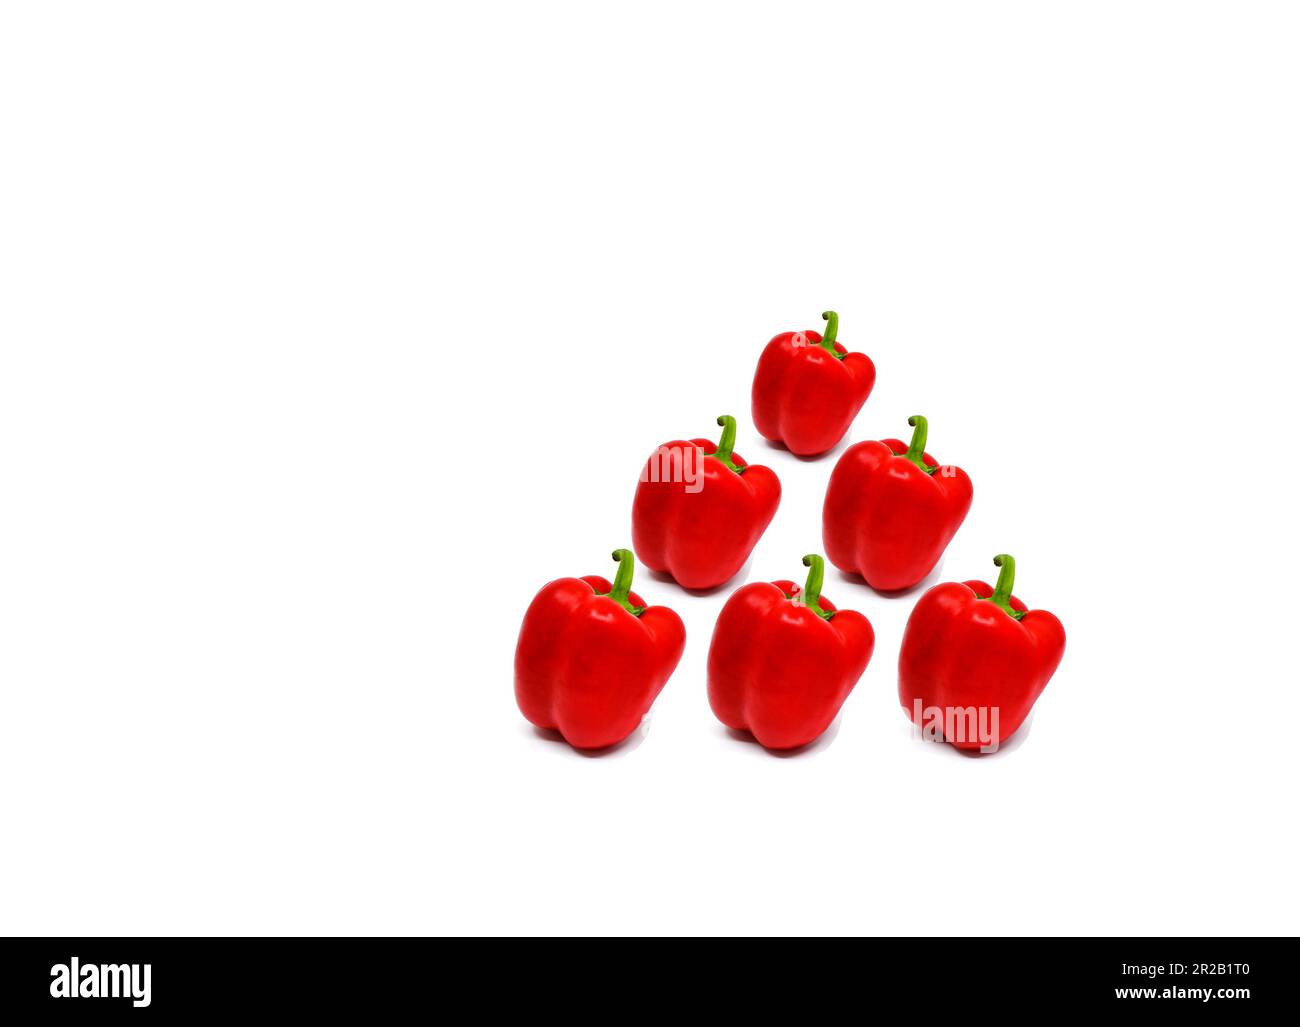 Red bell peppers isolated on a plain white background. Copy space. Stock Photo